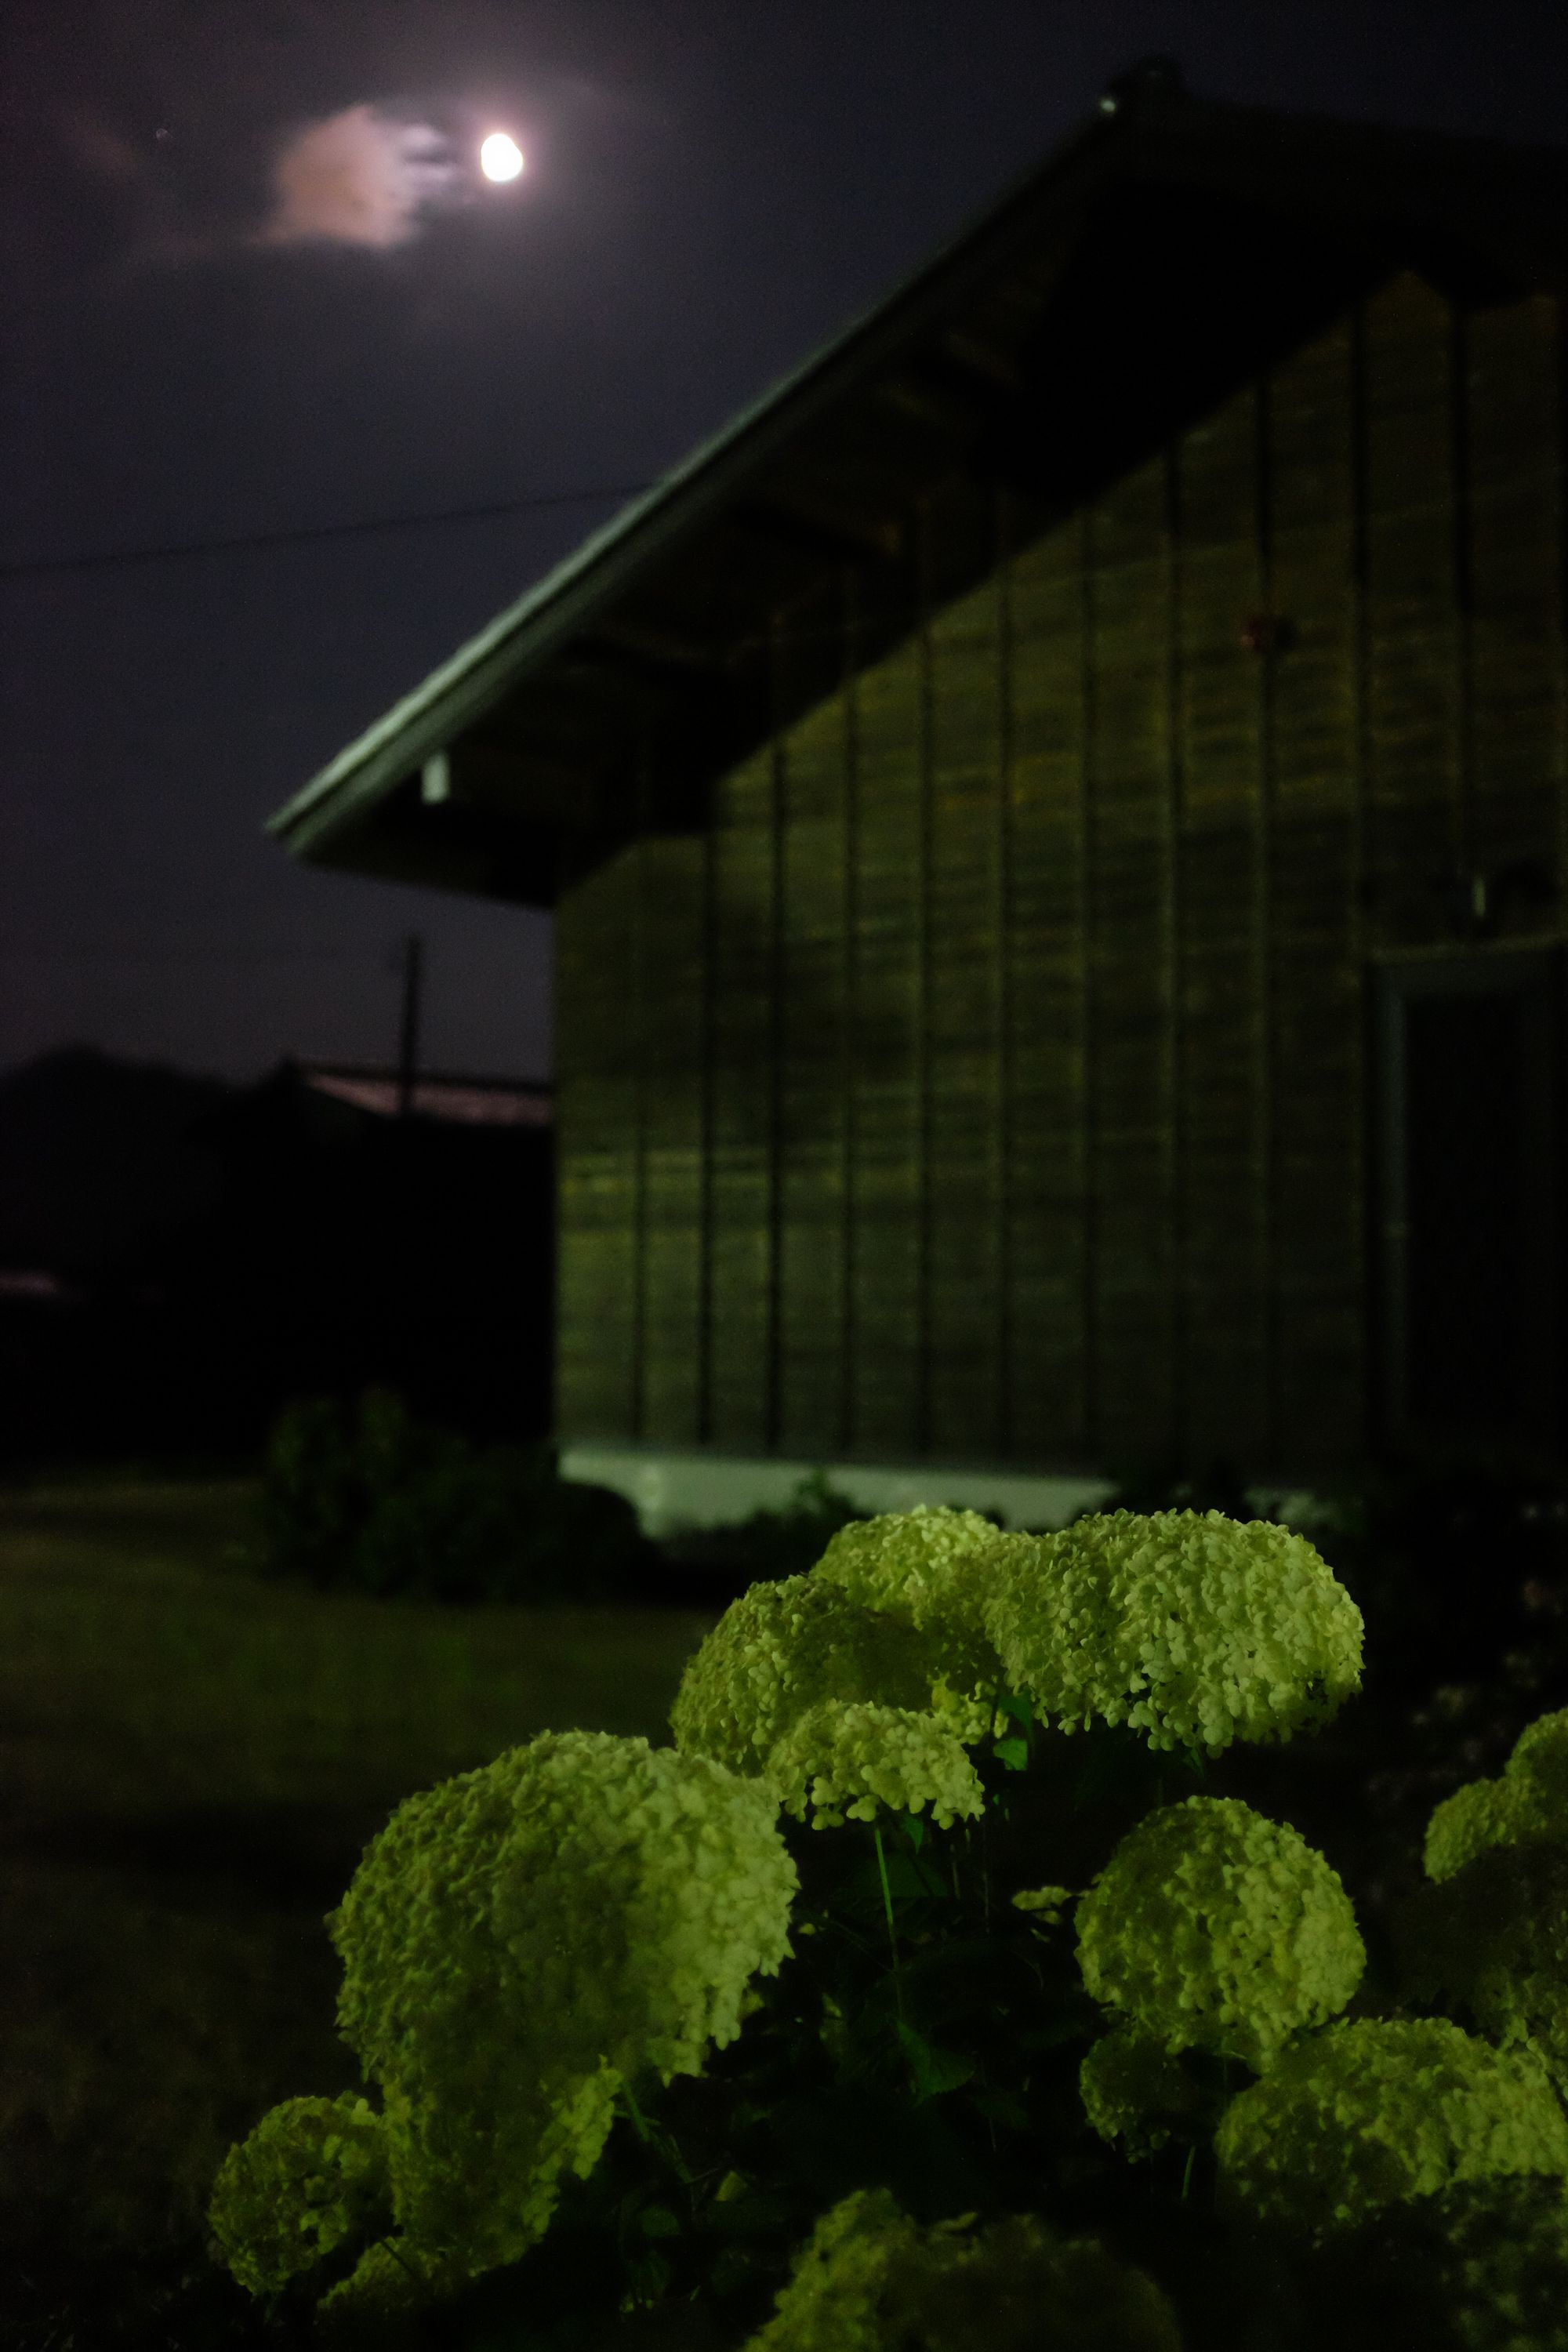 Green hydrangeas in the garden of a traditional Japanese house, with the Moon visible in the night sky.